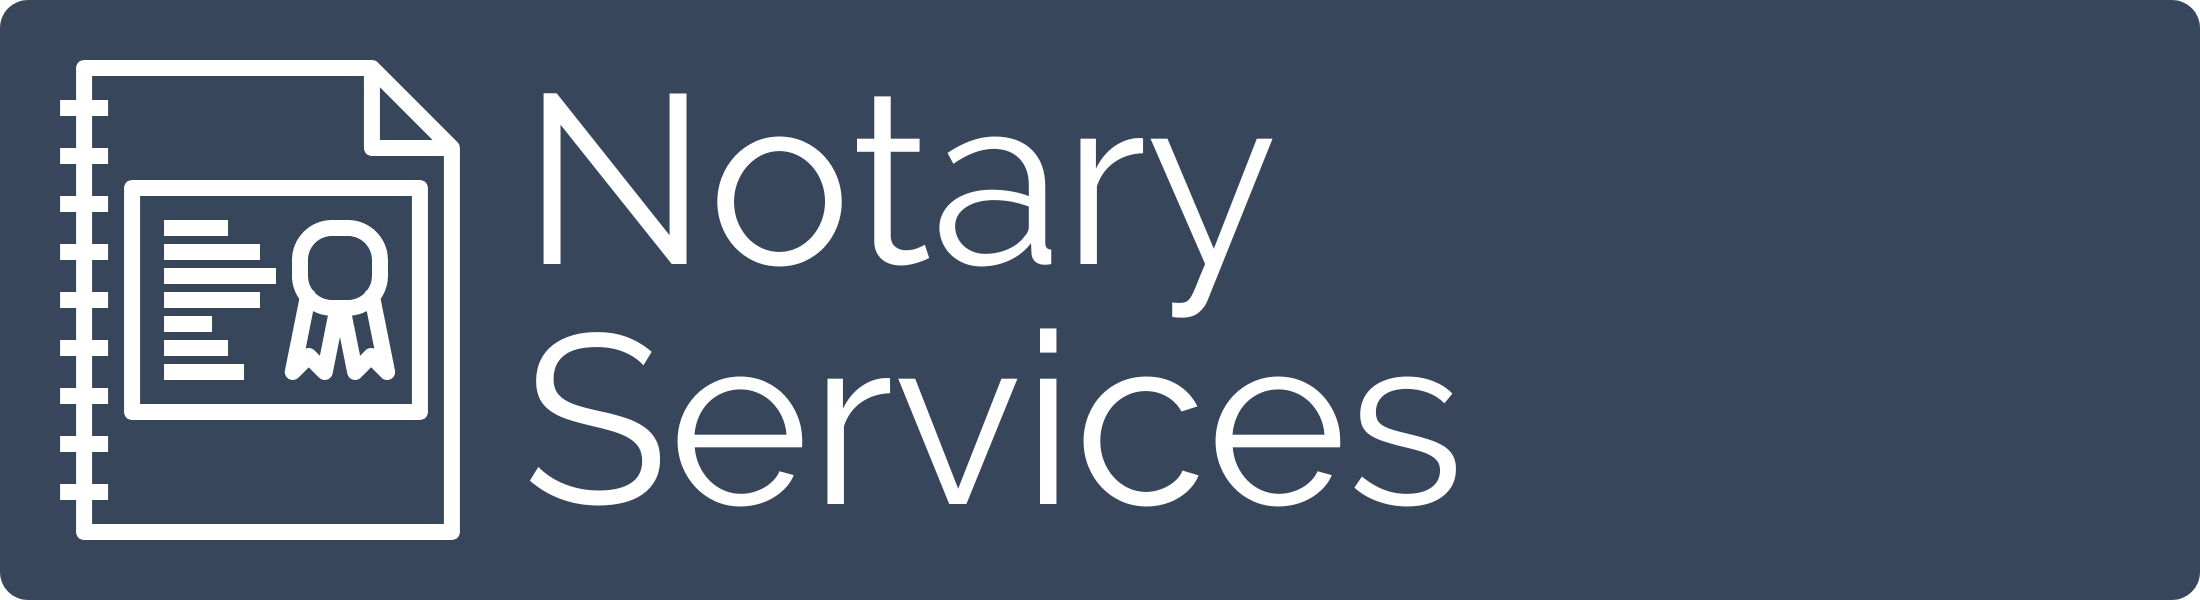 notary services at the bedford public library